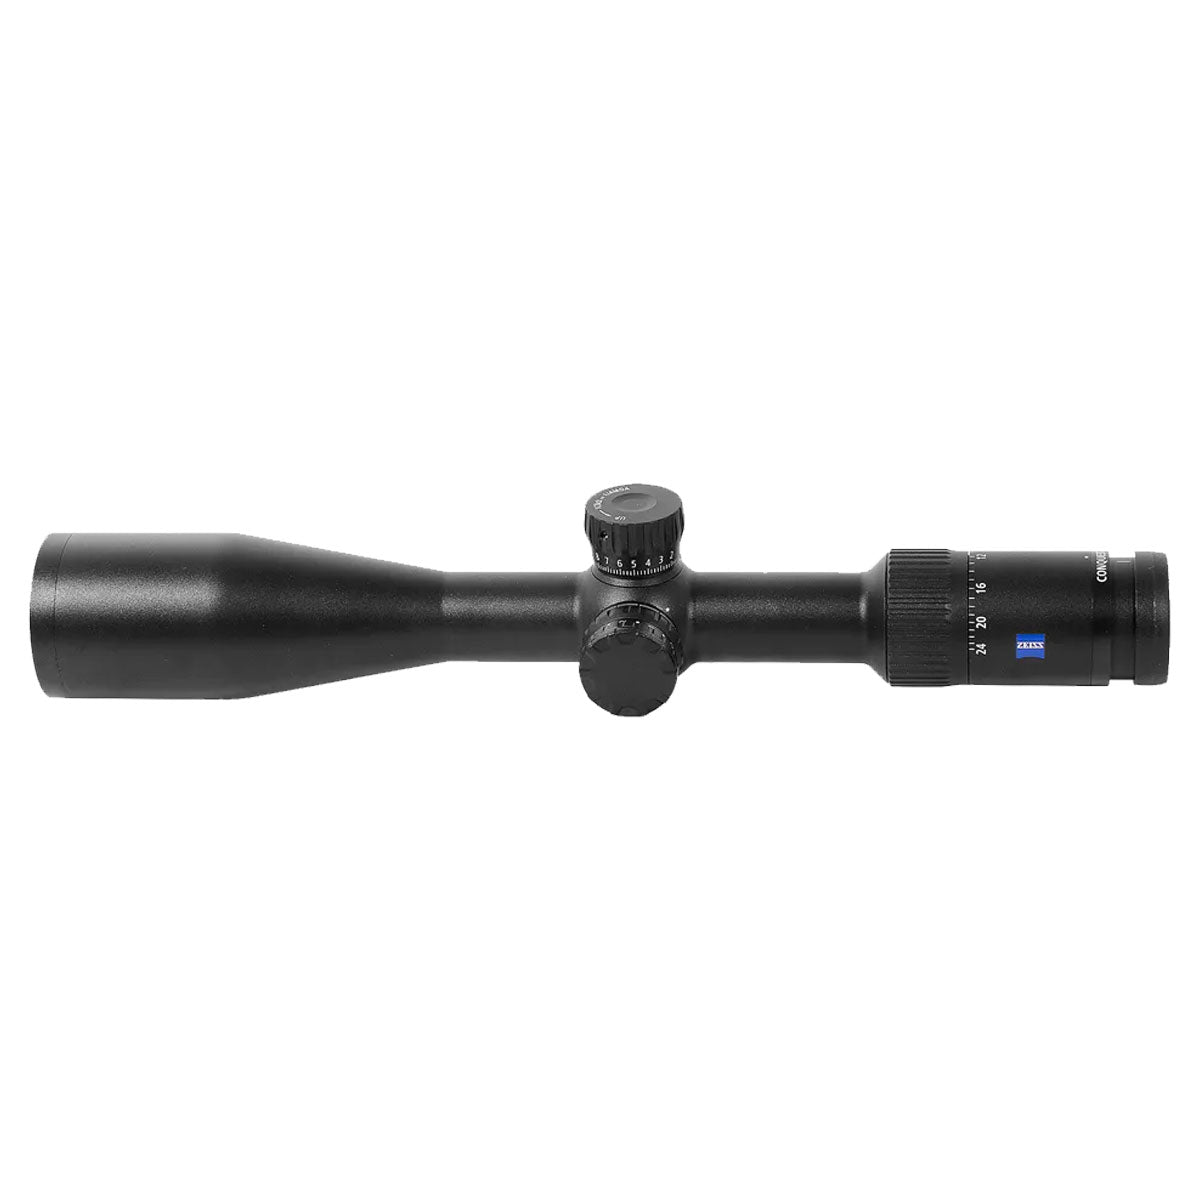 Zeiss Conquest V4 6-24x50 with ZBi Illuminated #68 Reticle Ext. Locking Wind Riflescope in  by GOHUNT | Zeiss - GOHUNT Shop